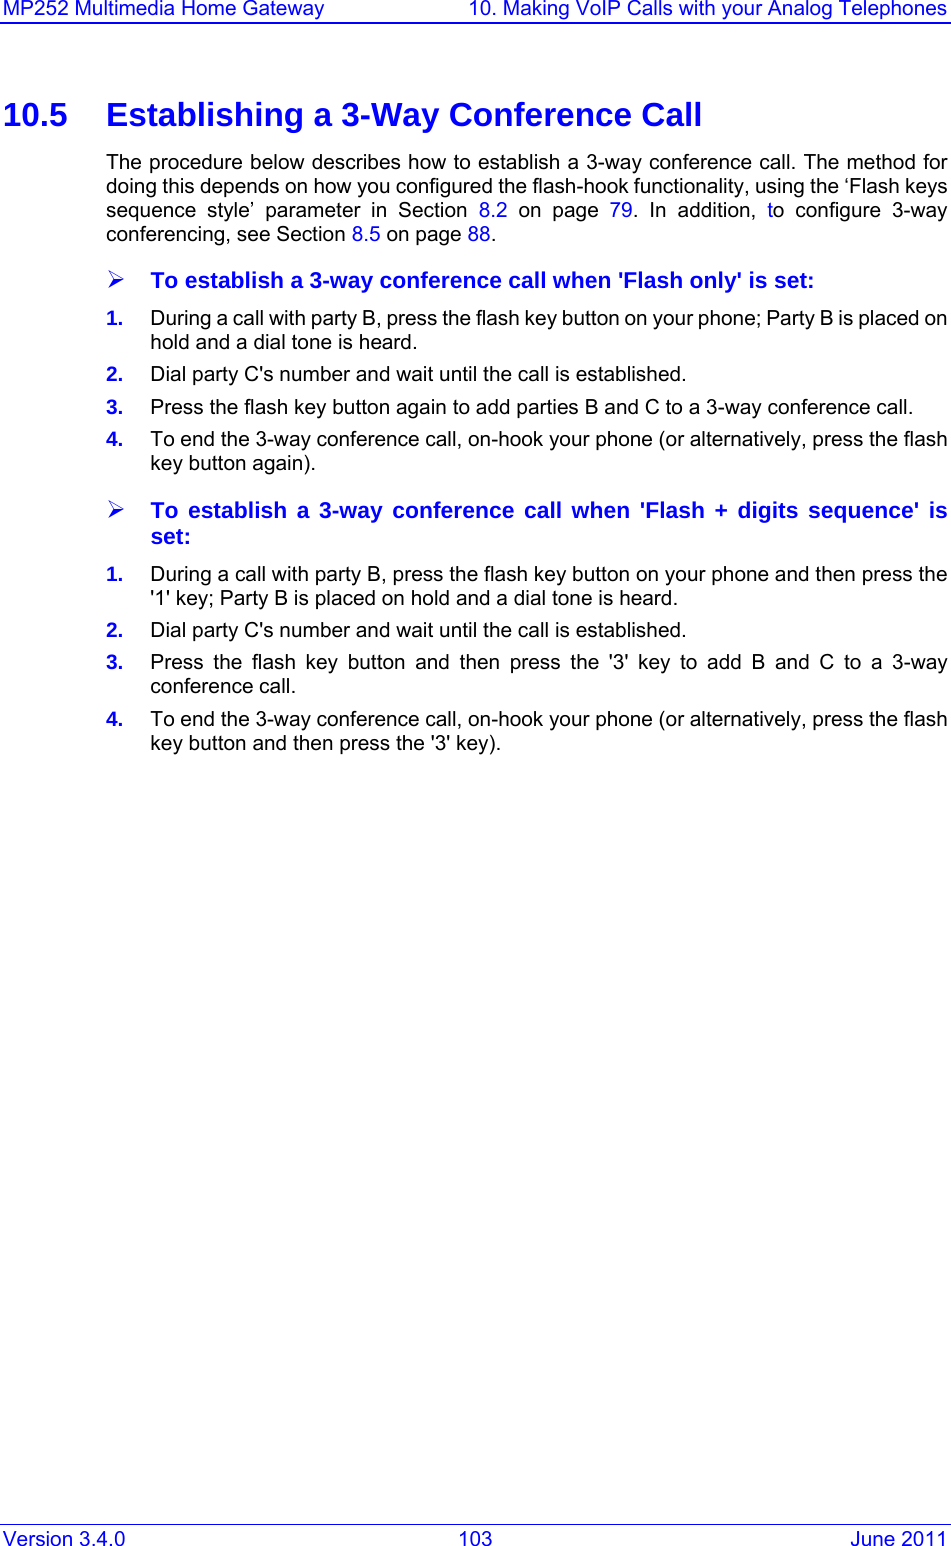 MP252 Multimedia Home Gateway  10. Making VoIP Calls with your Analog Telephones Version 3.4.0  103  June 2011 10.5  Establishing a 3-Way Conference Call The procedure below describes how to establish a 3-way conference call. The method for doing this depends on how you configured the flash-hook functionality, using the ‘Flash keys sequence style’ parameter in Section 8.2  on page 79. In addition, to configure 3-way conferencing, see Section 8.5 on page 88. ¾ To establish a 3-way conference call when &apos;Flash only&apos; is set: 1.  During a call with party B, press the flash key button on your phone; Party B is placed on hold and a dial tone is heard. 2.  Dial party C&apos;s number and wait until the call is established. 3.  Press the flash key button again to add parties B and C to a 3-way conference call. 4.  To end the 3-way conference call, on-hook your phone (or alternatively, press the flash key button again). ¾ To establish a 3-way conference call when &apos;Flash + digits sequence&apos; is set: 1.  During a call with party B, press the flash key button on your phone and then press the &apos;1&apos; key; Party B is placed on hold and a dial tone is heard. 2.  Dial party C&apos;s number and wait until the call is established. 3.  Press the flash key button and then press the &apos;3&apos; key to add B and C to a 3-way conference call. 4.  To end the 3-way conference call, on-hook your phone (or alternatively, press the flash key button and then press the &apos;3&apos; key).   